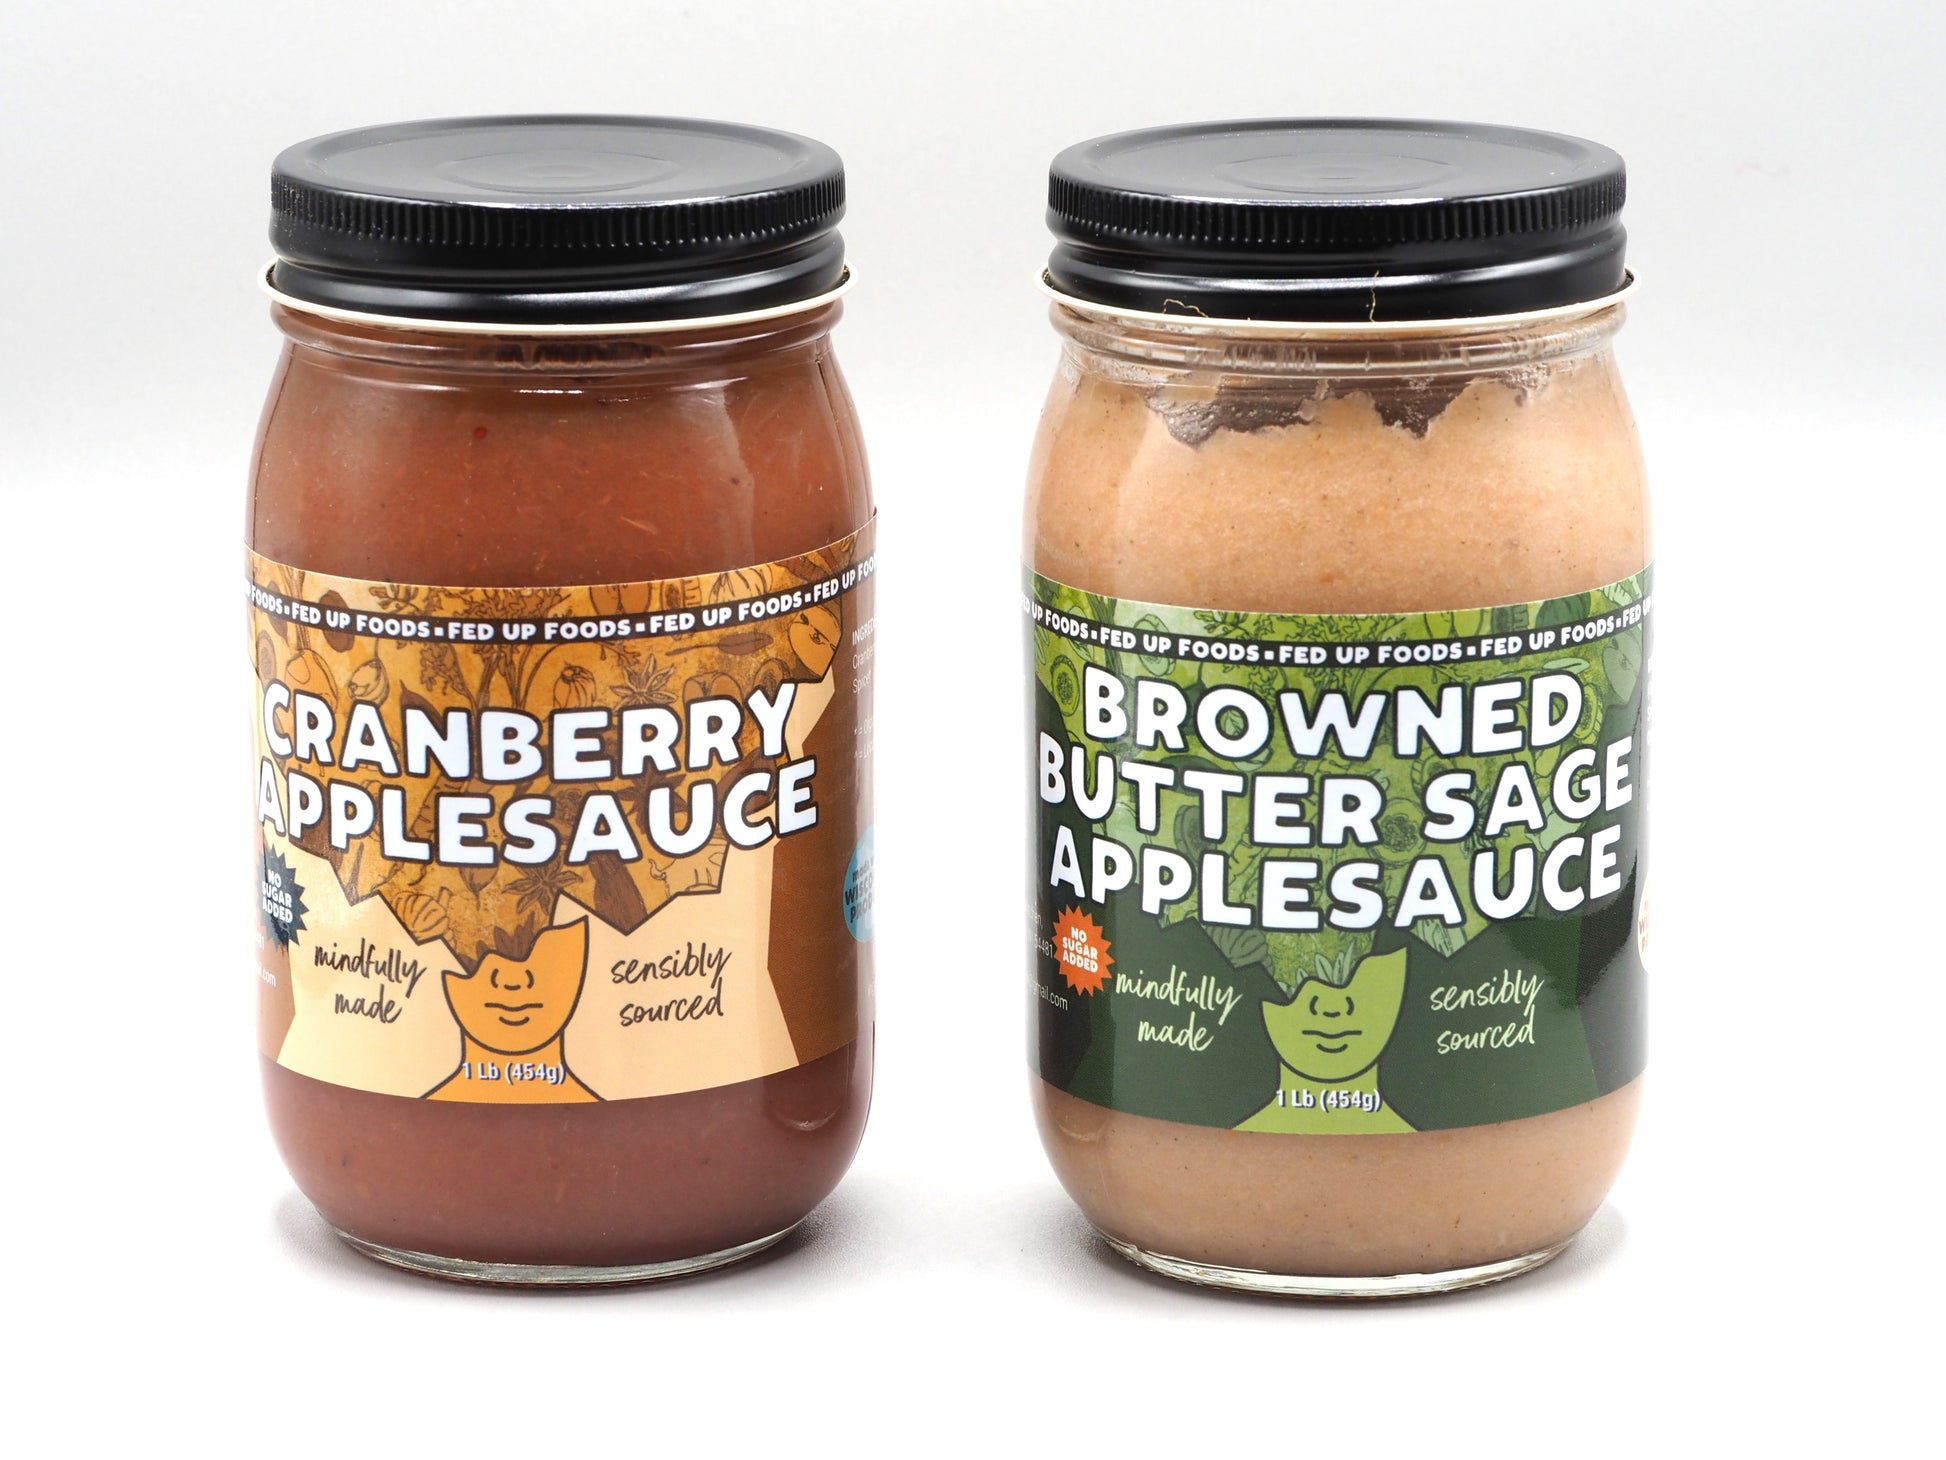 Fed Up Foods Cranberry Applesauce and Browned Butter Sage Applesauce in a 2 pack build your own variety pack